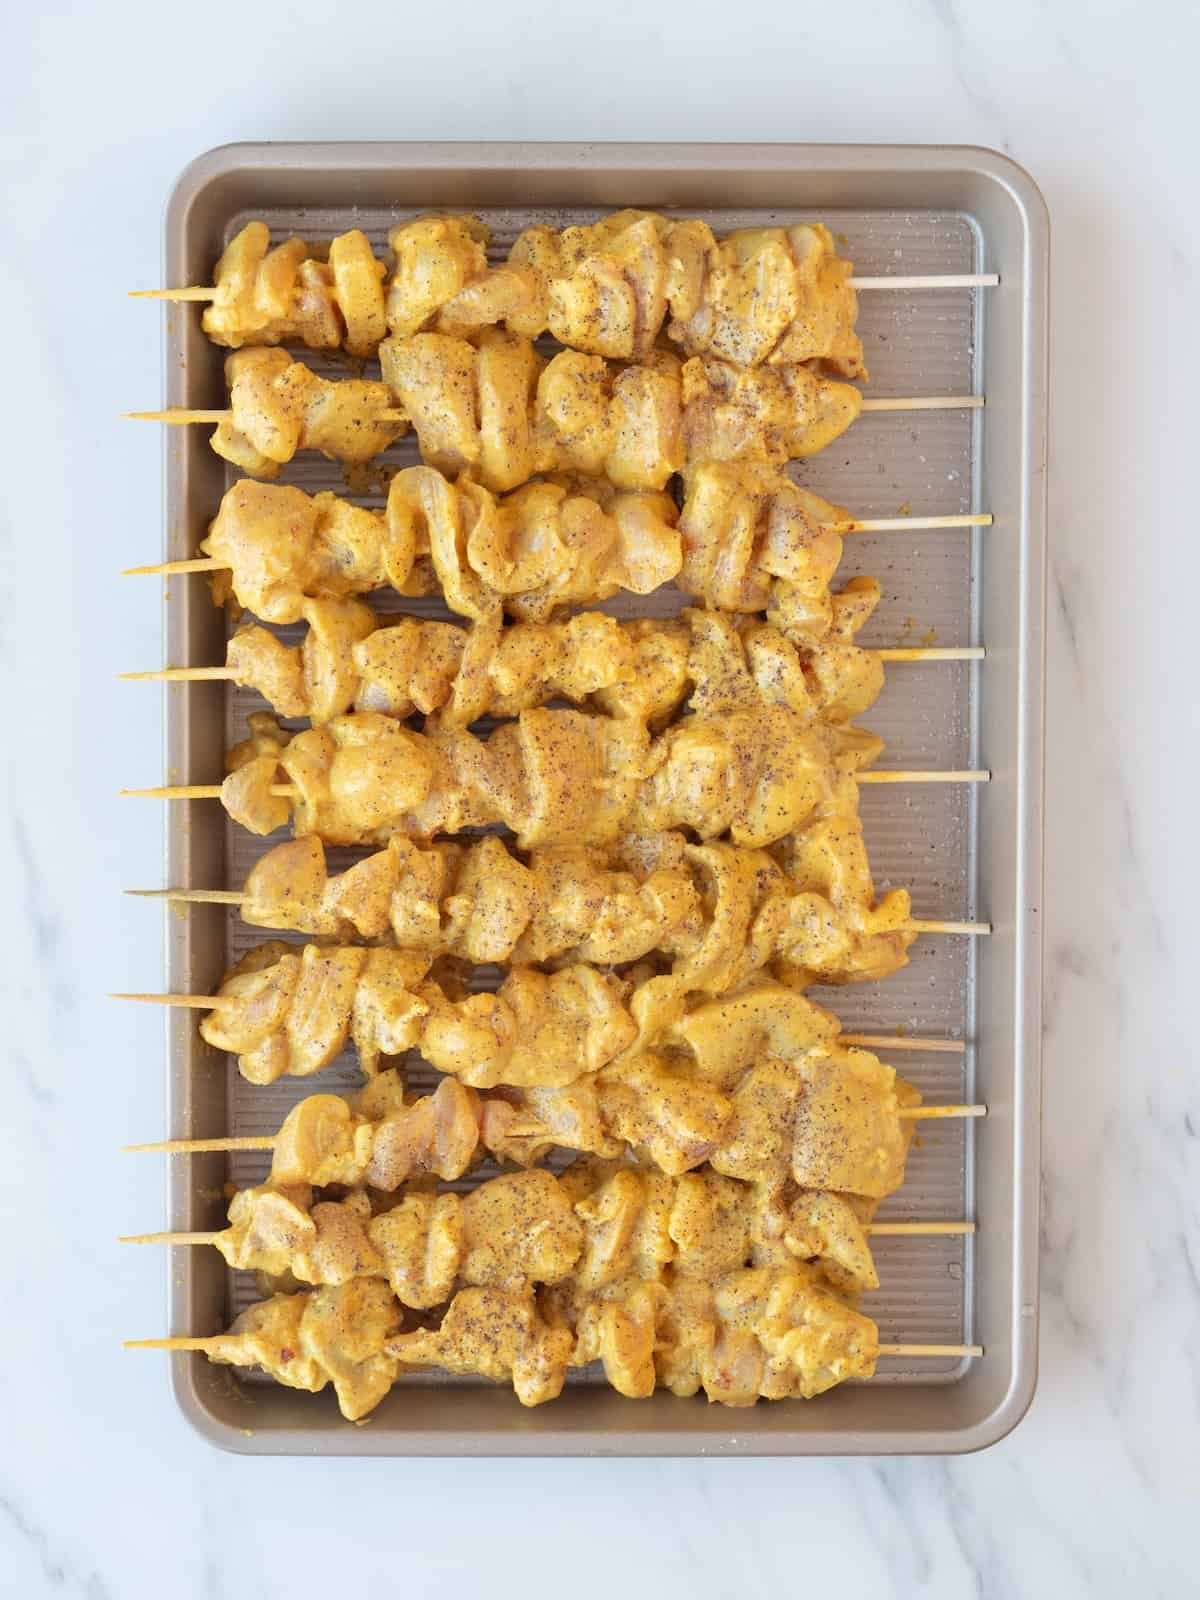 A baking sheet with marinated chicken pieces threaded onto skewers and sprinkled with salt and pepper.